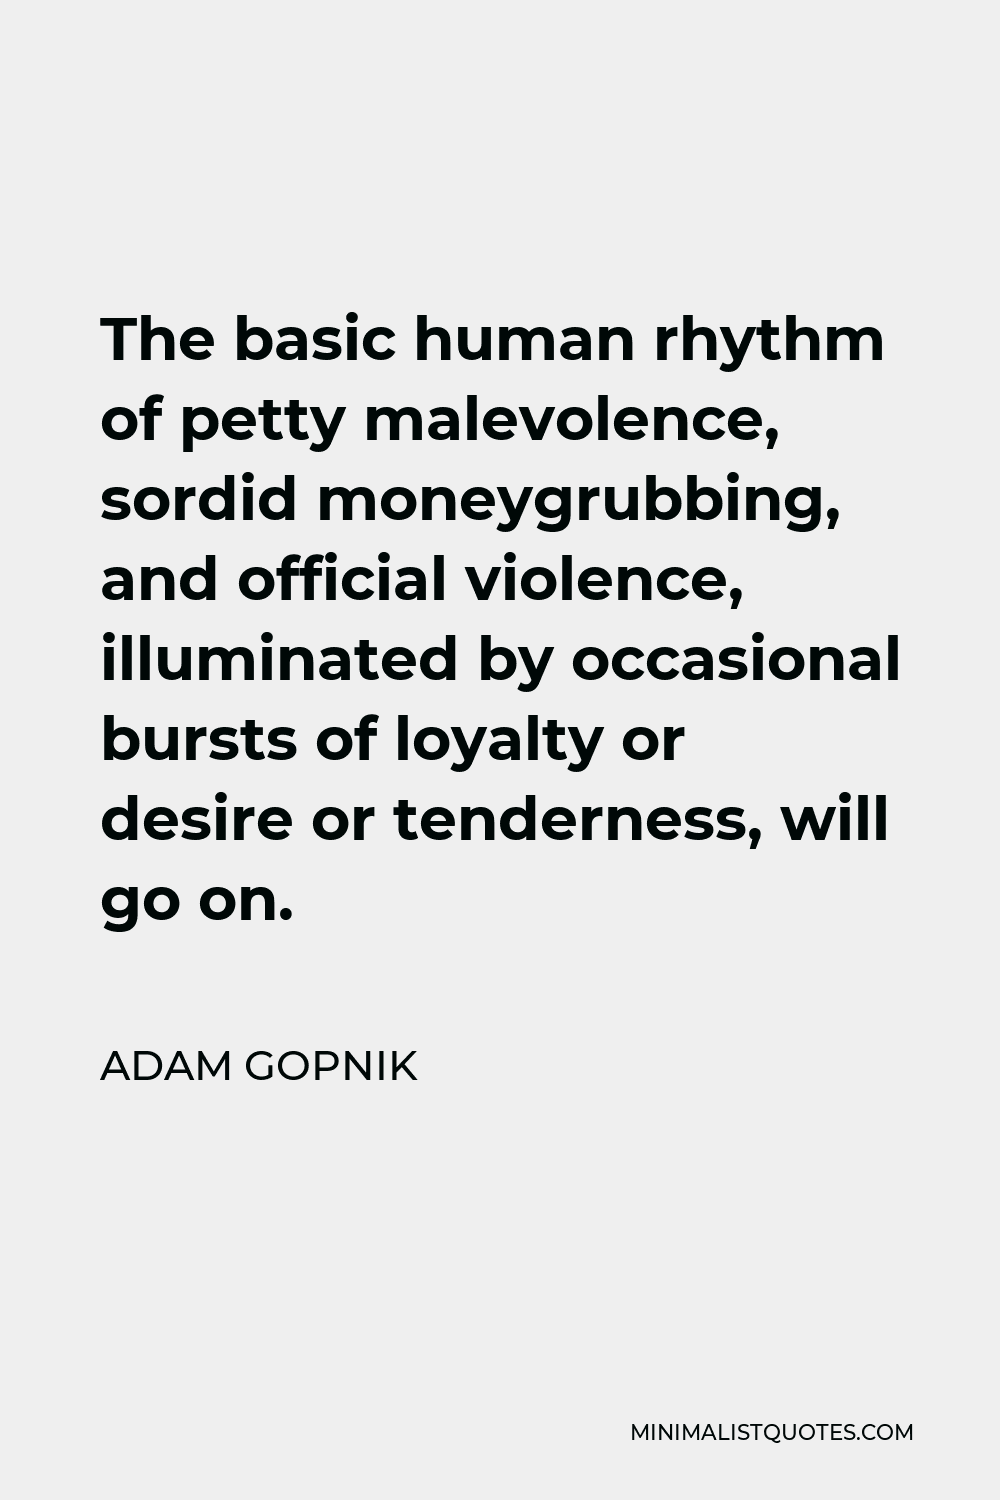 Adam Gopnik Quote - The basic human rhythm of petty malevolence, sordid moneygrubbing, and official violence, illuminated by occasional bursts of loyalty or desire or tenderness, will go on.